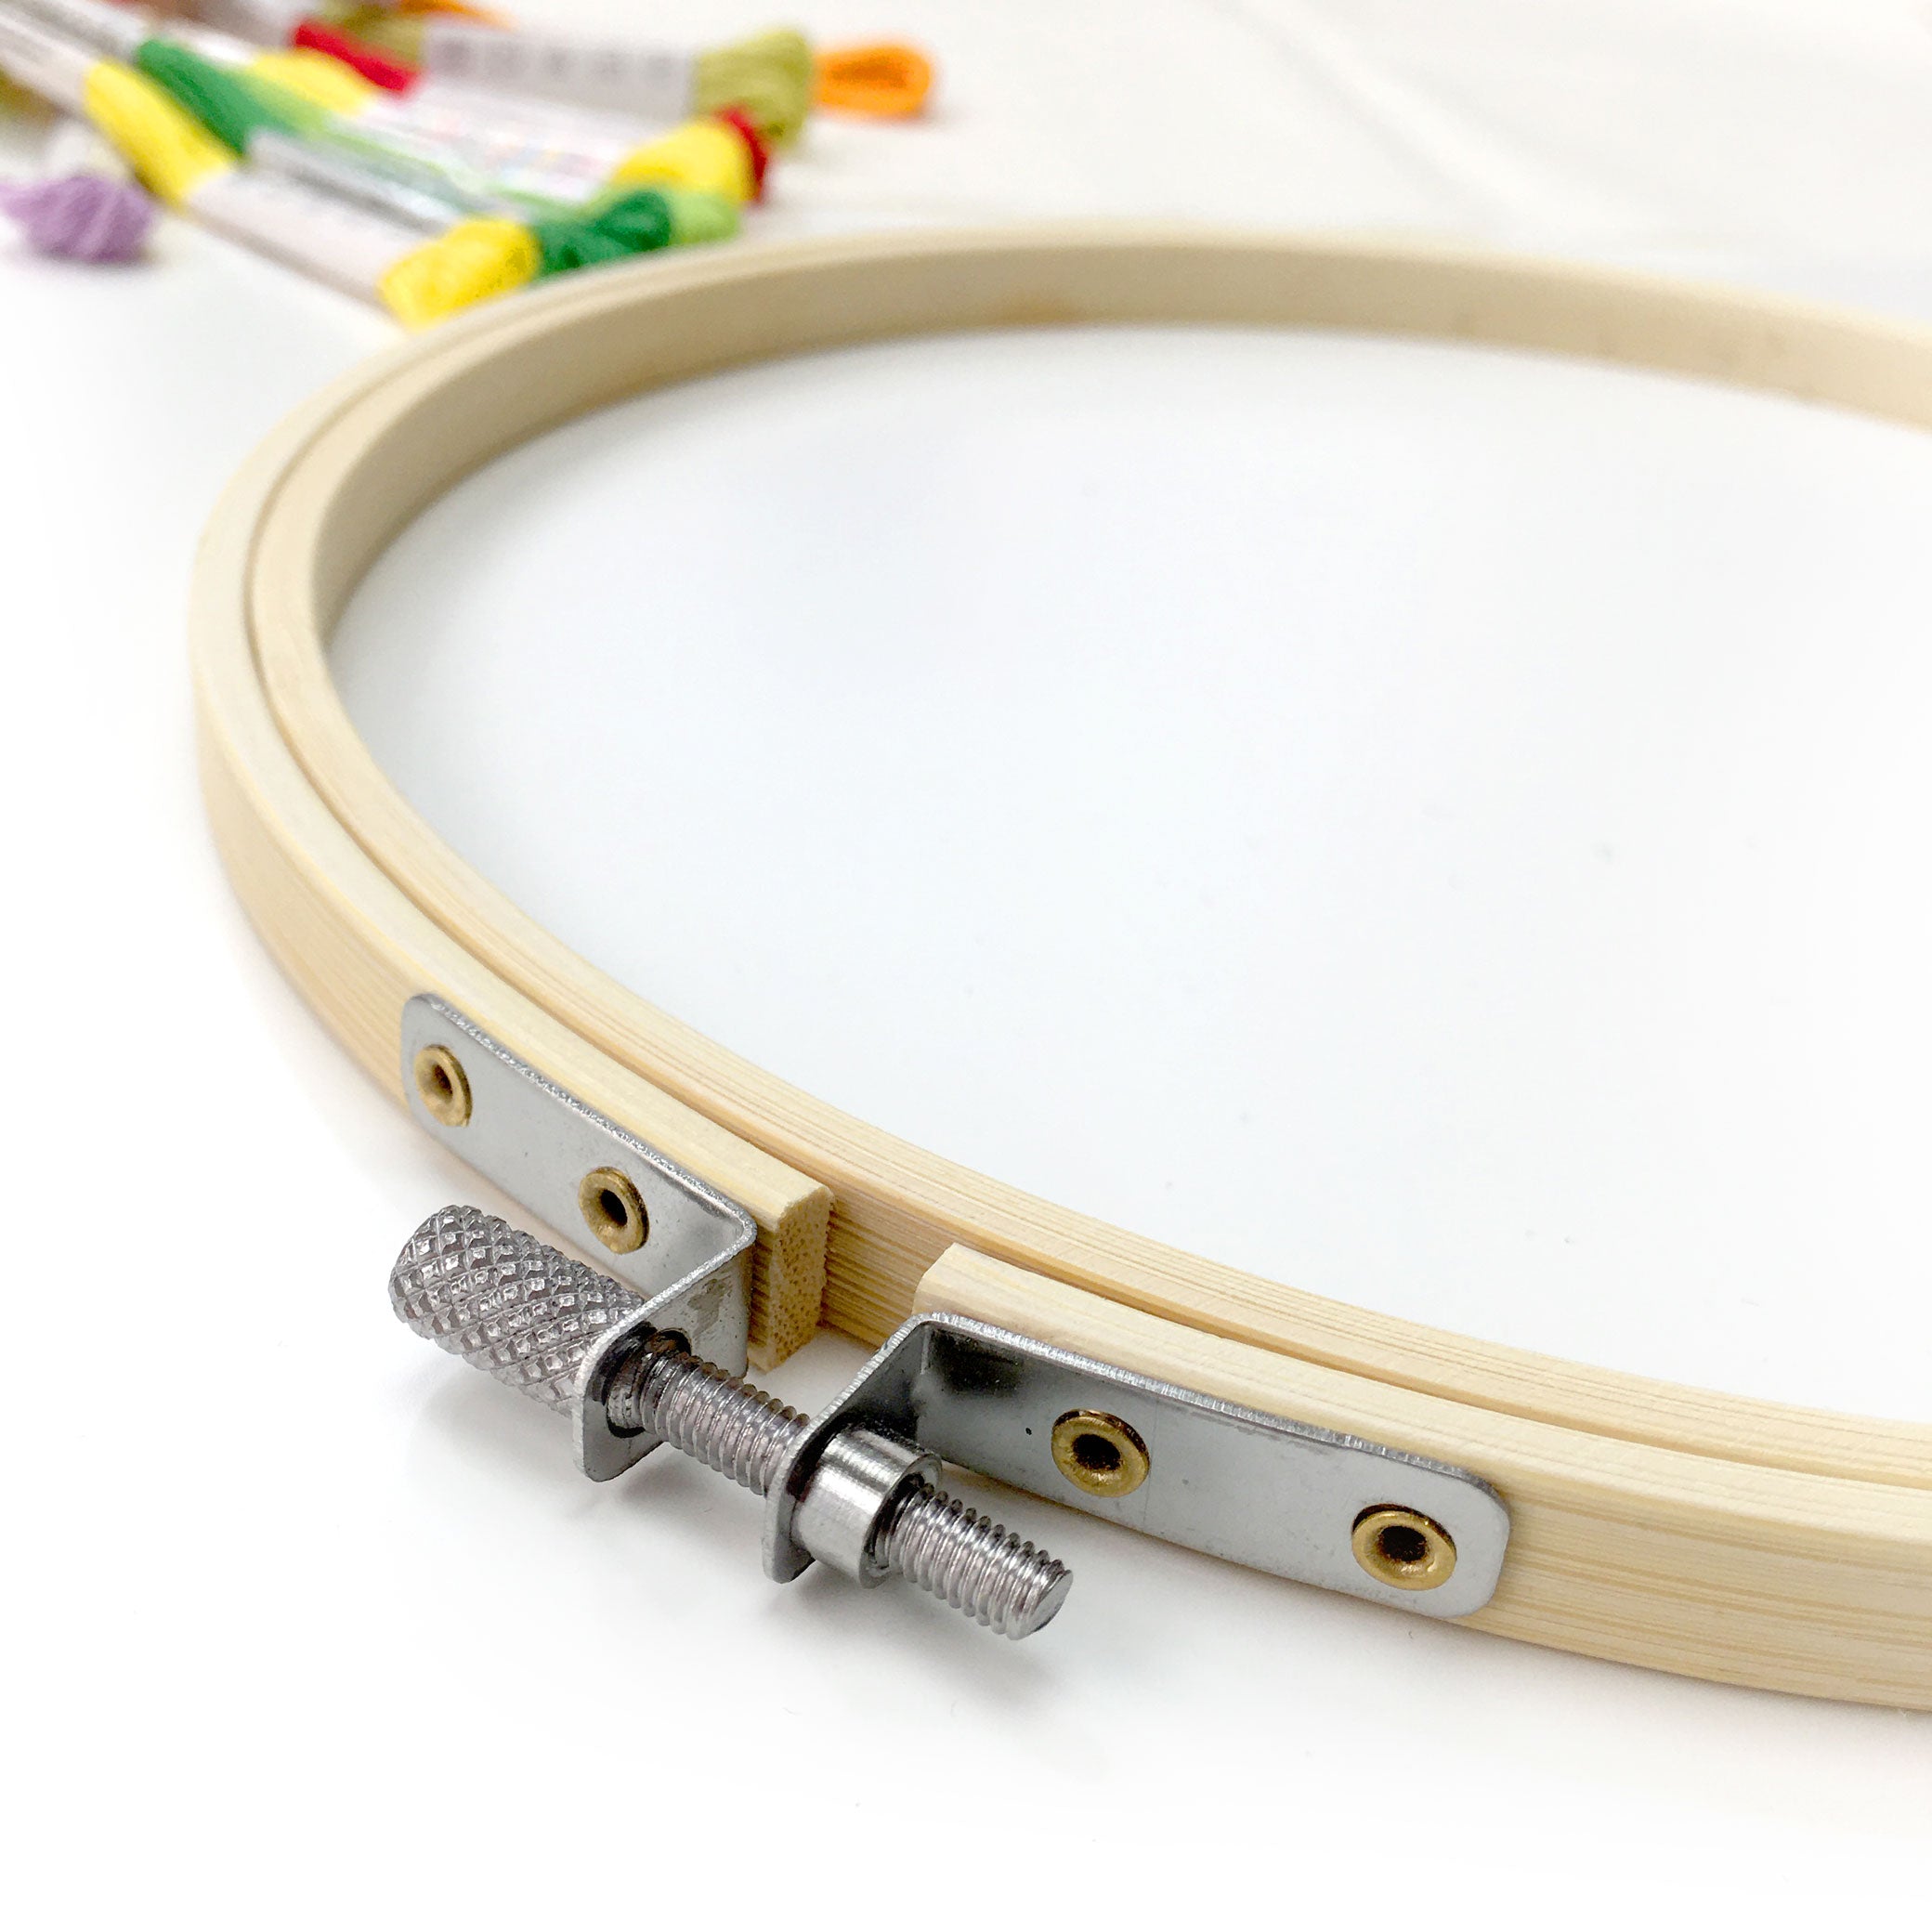 8-inch embroidery hoop - pack of 3